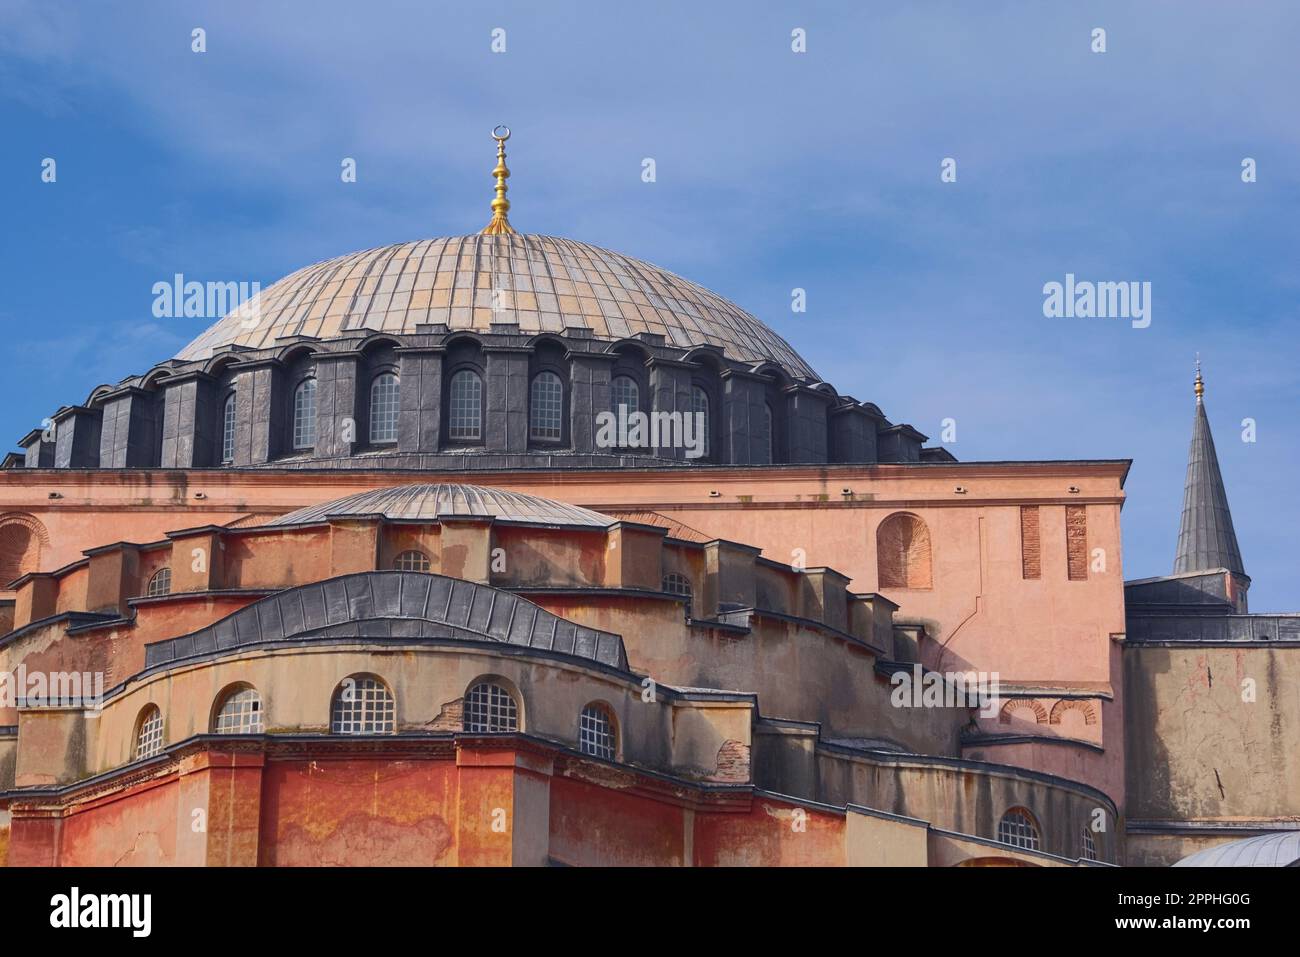 Back side of Hagia Sophia, in Istanbul, Turkey. Architectural detail of the main dome. Stock Photo